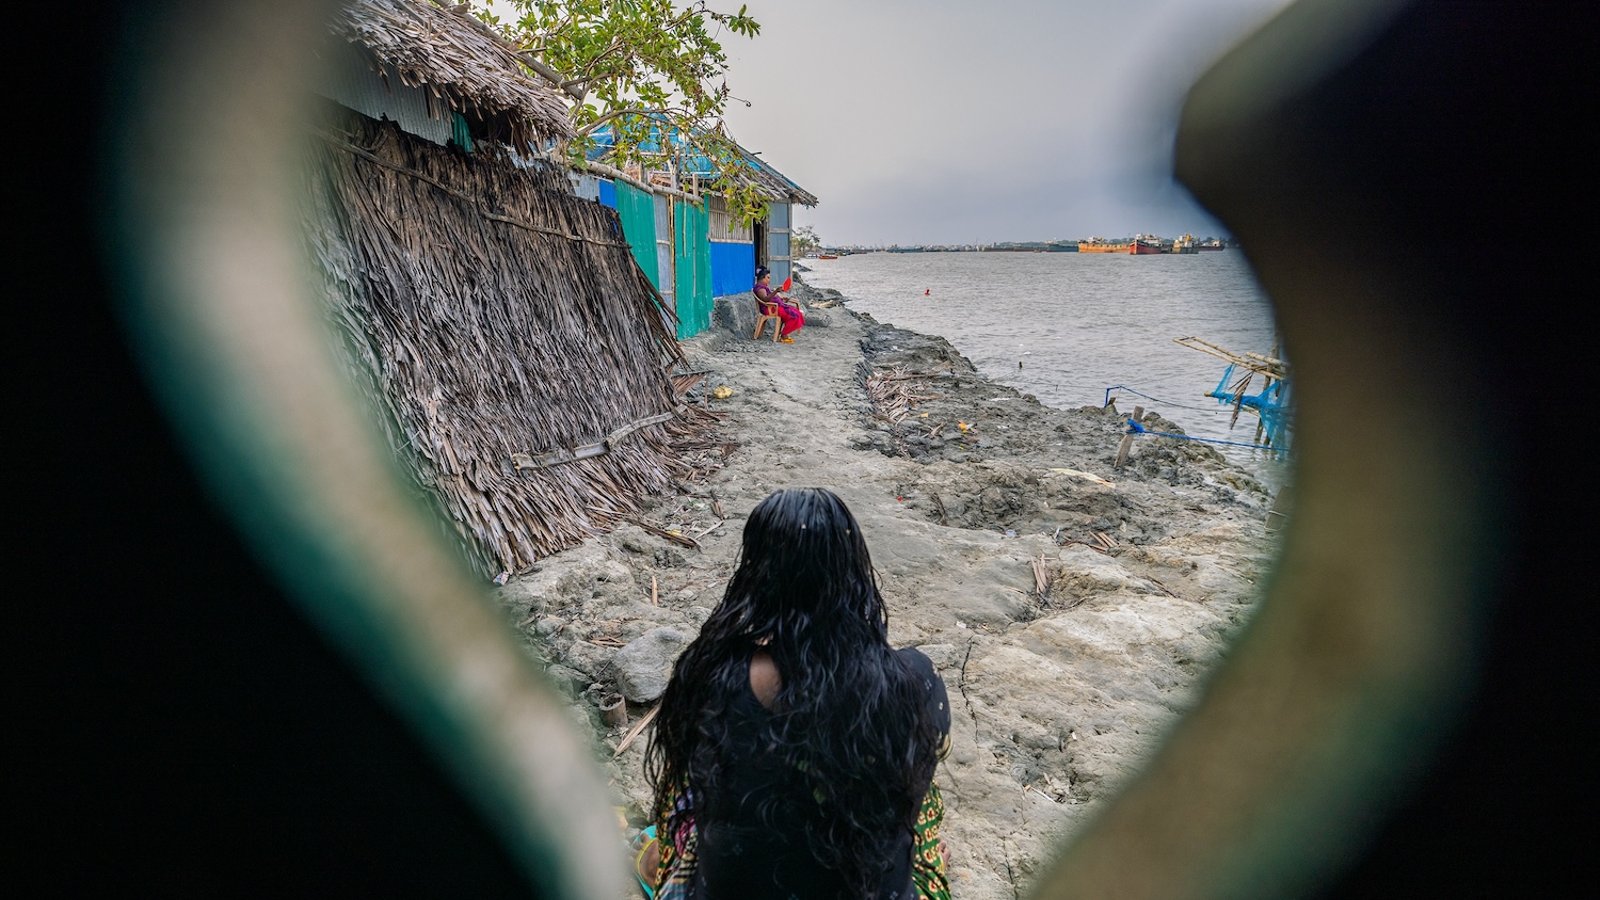 Almost every year, tropical cyclones transform the River Pasur’s fast-running current into turbulent tides to accelerate the sinking of Banishanta Para, Khulna. Photo: Noor-A-Alam/BFirst